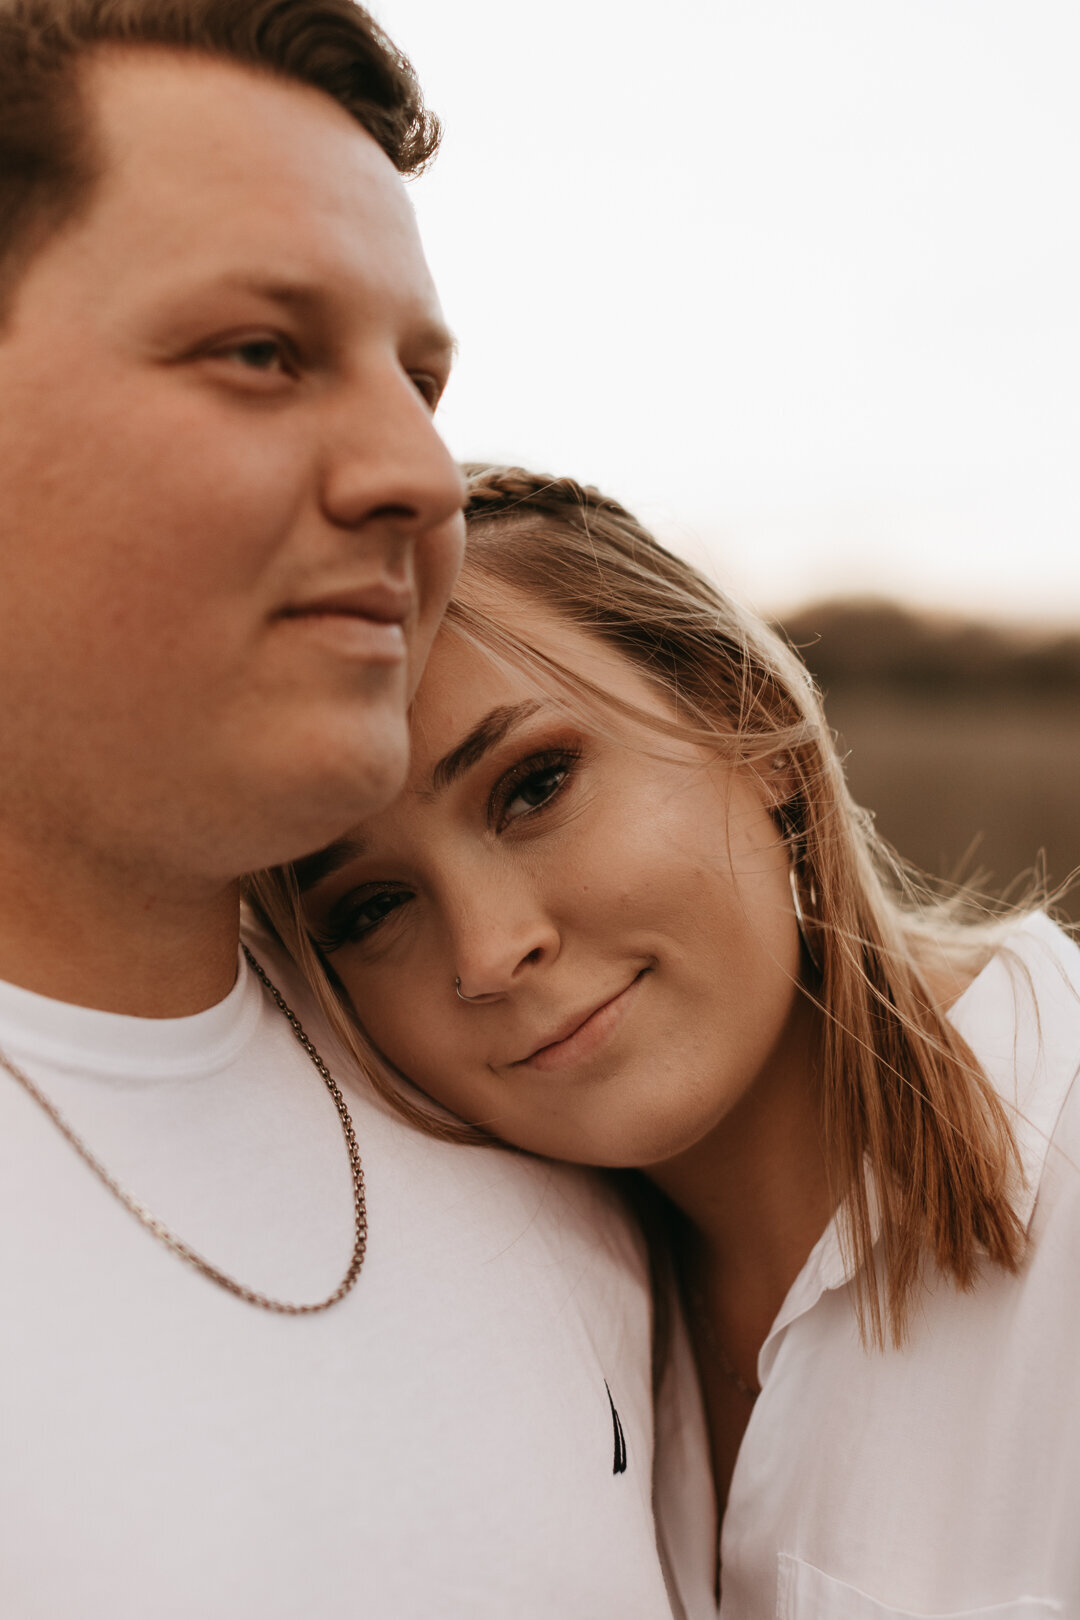 Lacee-Zach-Engagement020